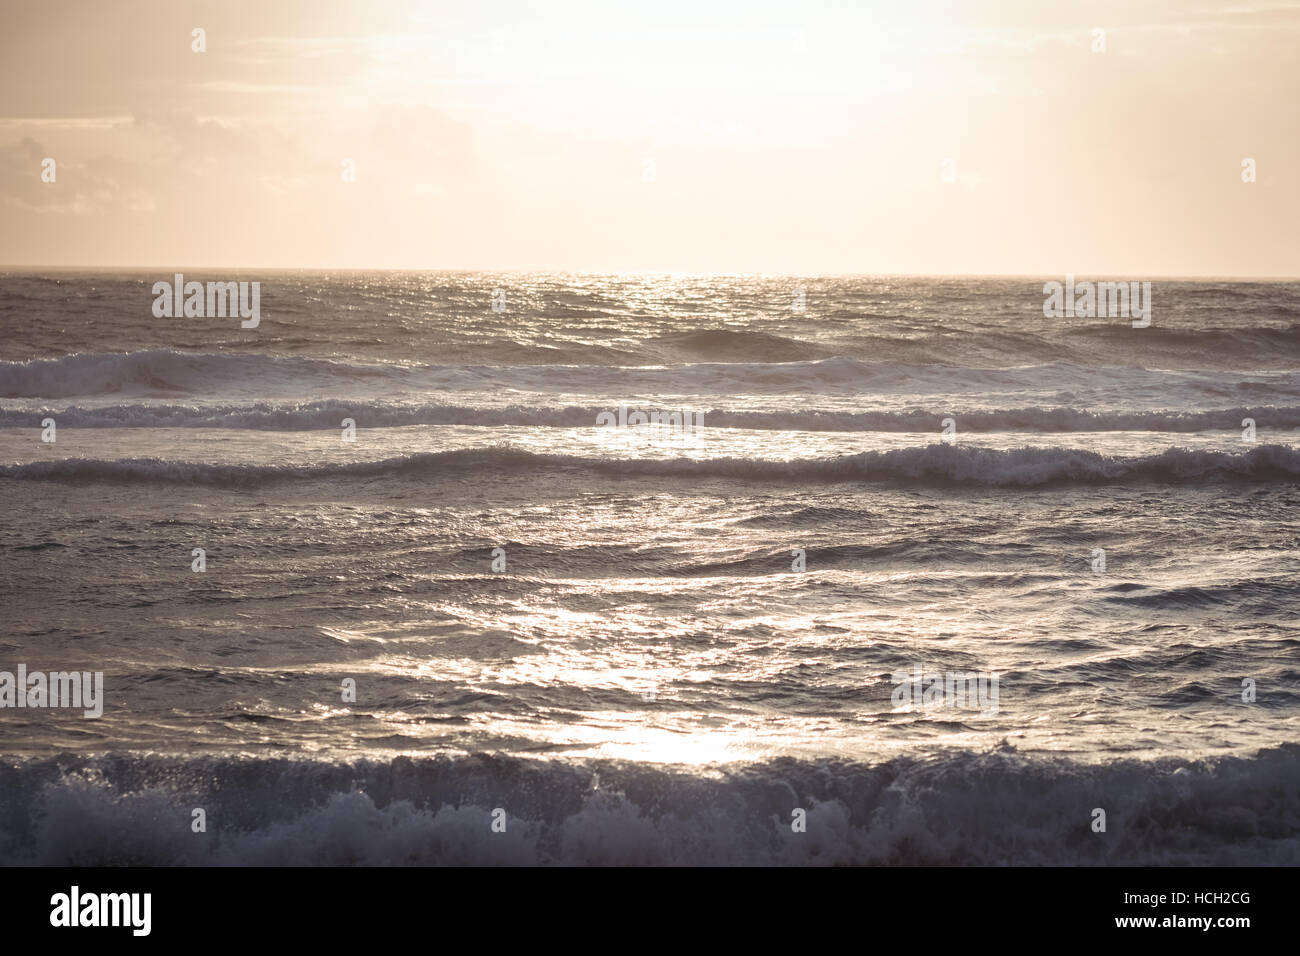 Sunlight reflecting on waves in sea at dusk Stock Photo